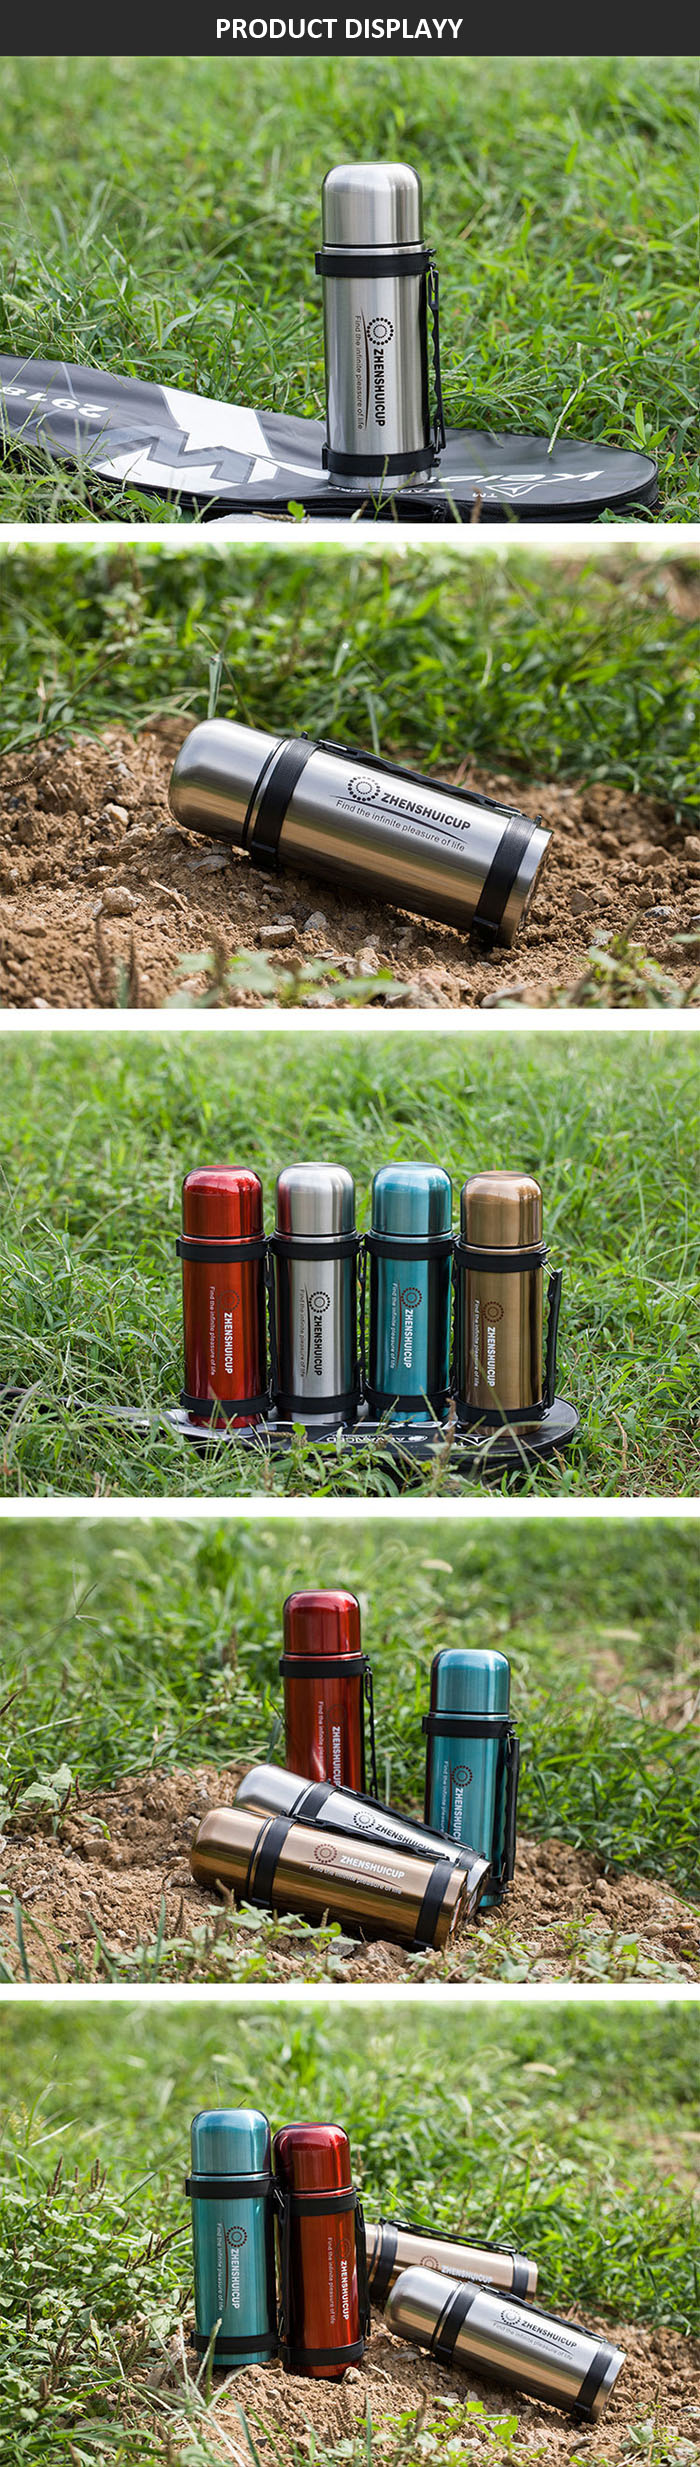 1.2L Large Outdoor Stainless Steel Travel Mug Thermos Vacuum Flask Bottle With Cup